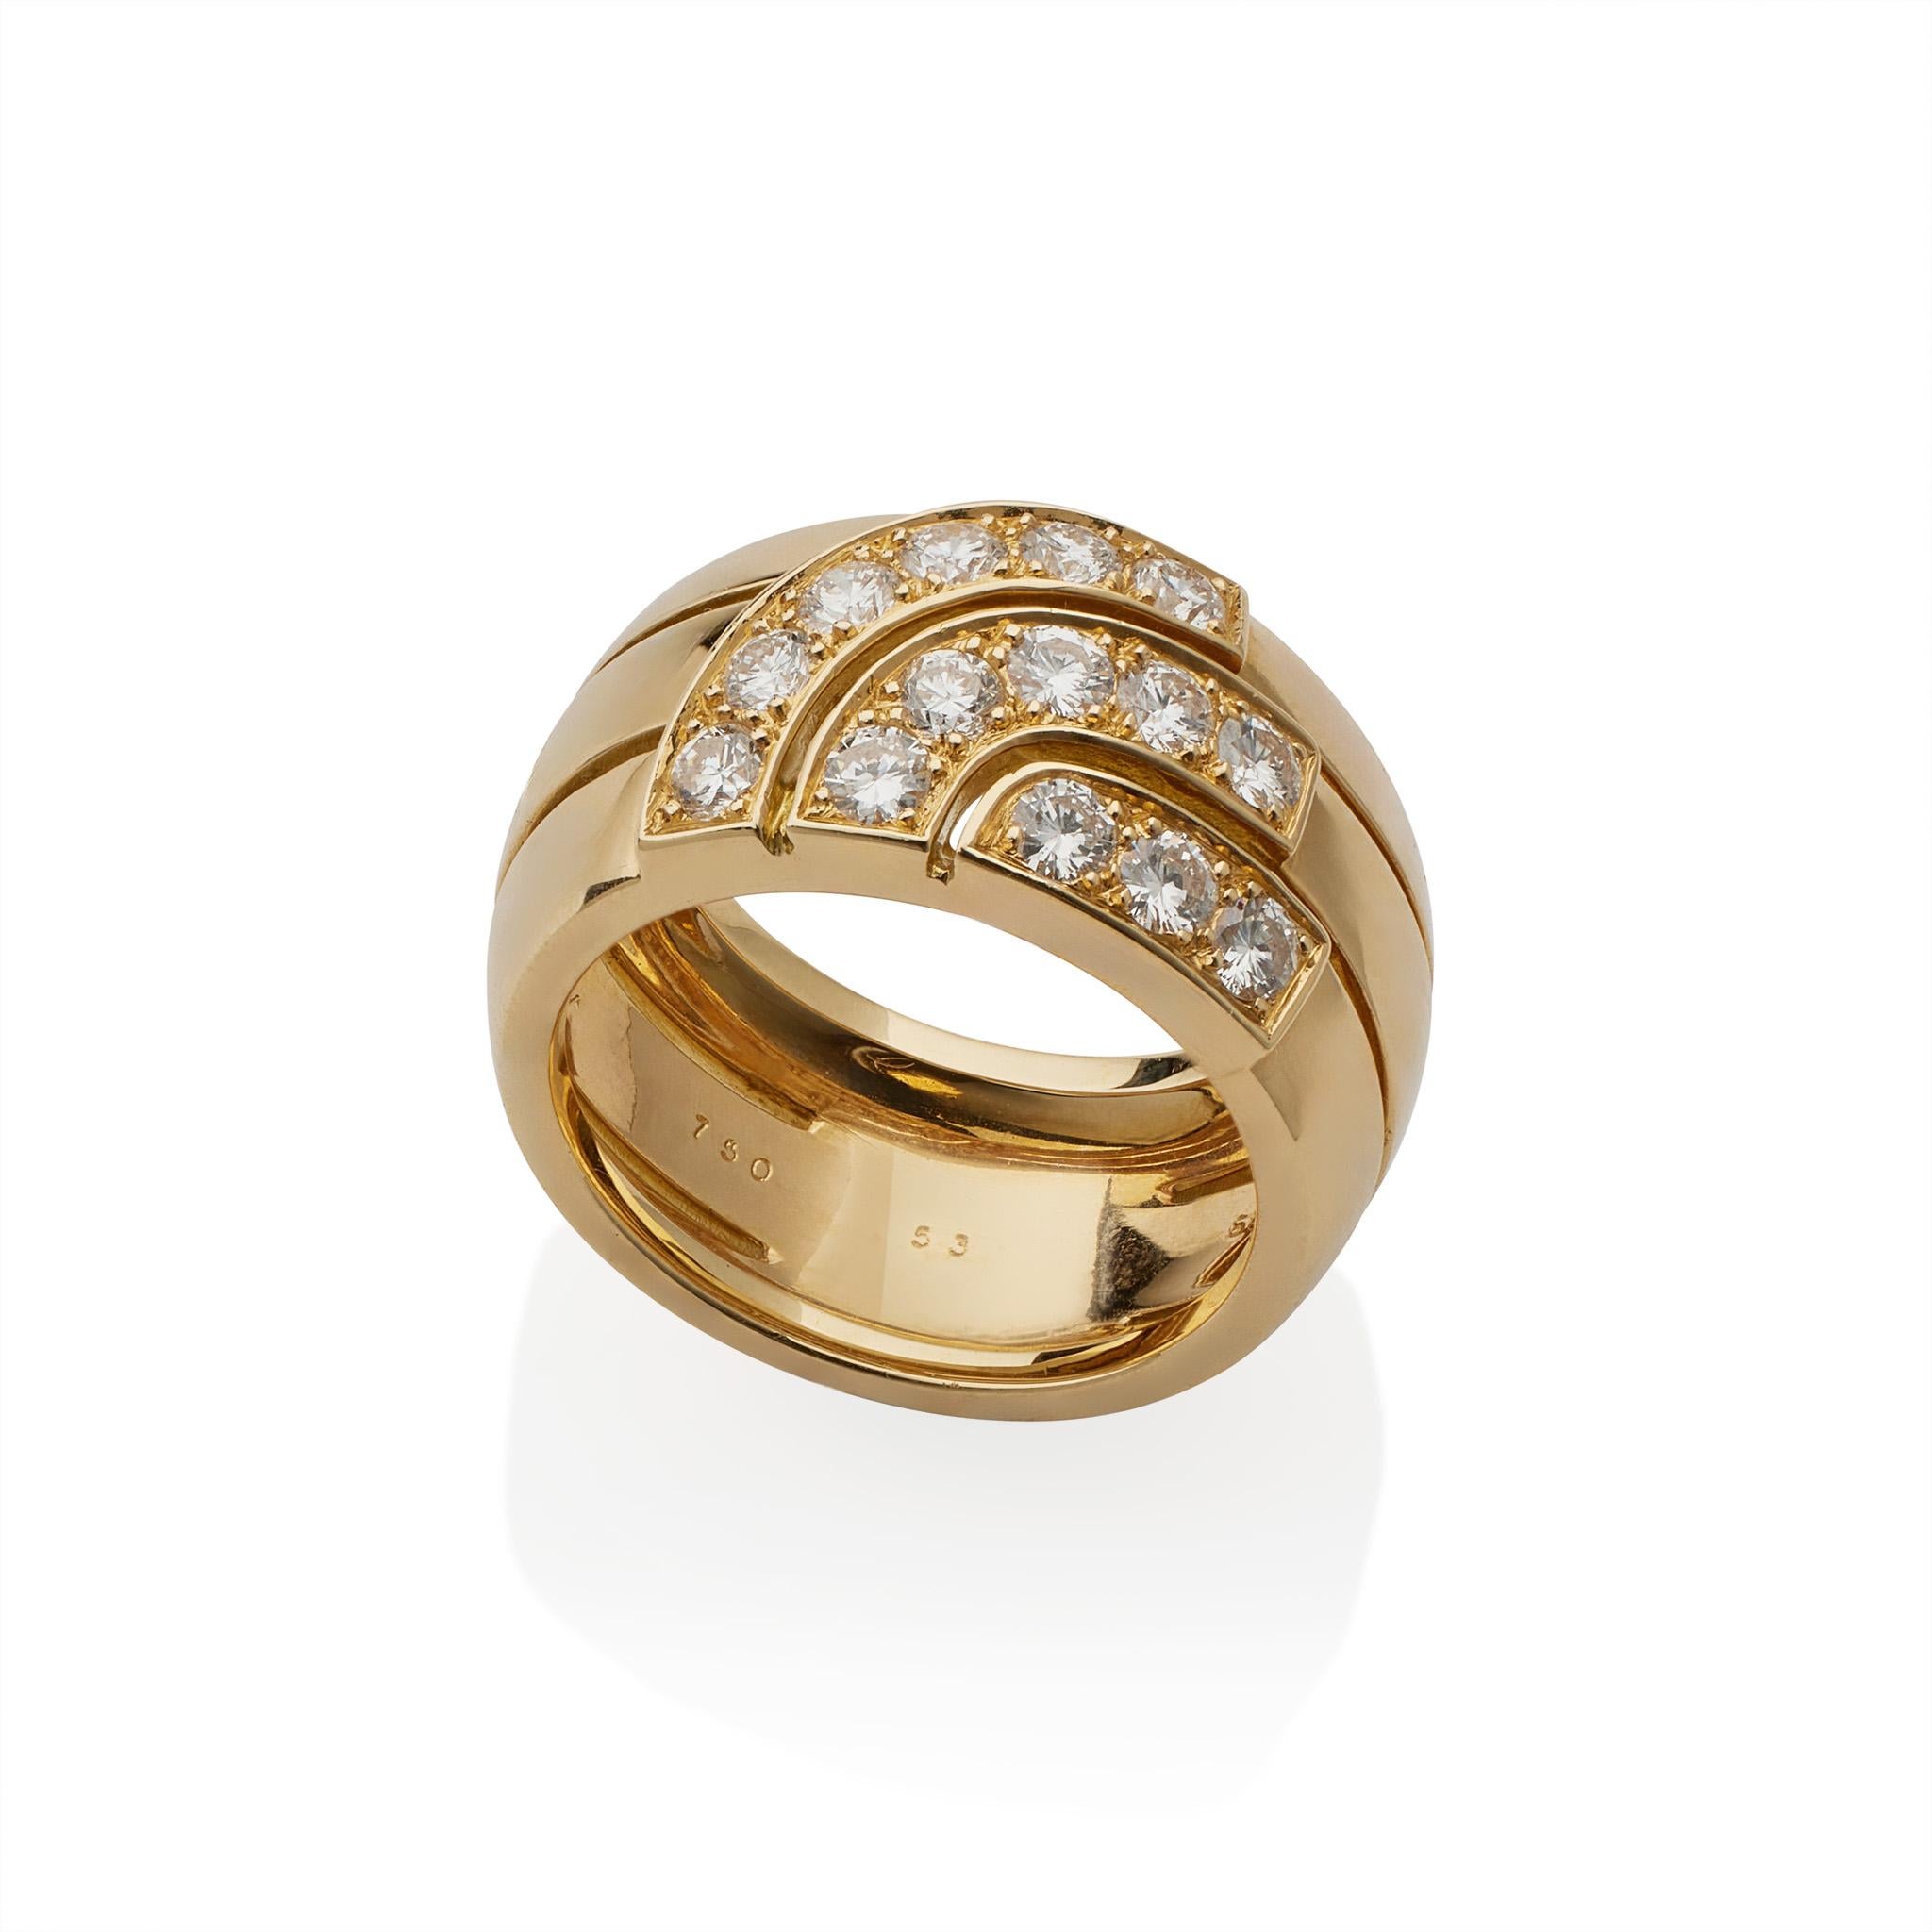 Created in the 1980s, this Cartier Paris ring is composed of 18K gold and diamonds. The slightly bombé form is designed a broad, incised triple band centering arched lines of round brilliant-cut diamonds. From the structured and streamlined 1980s,